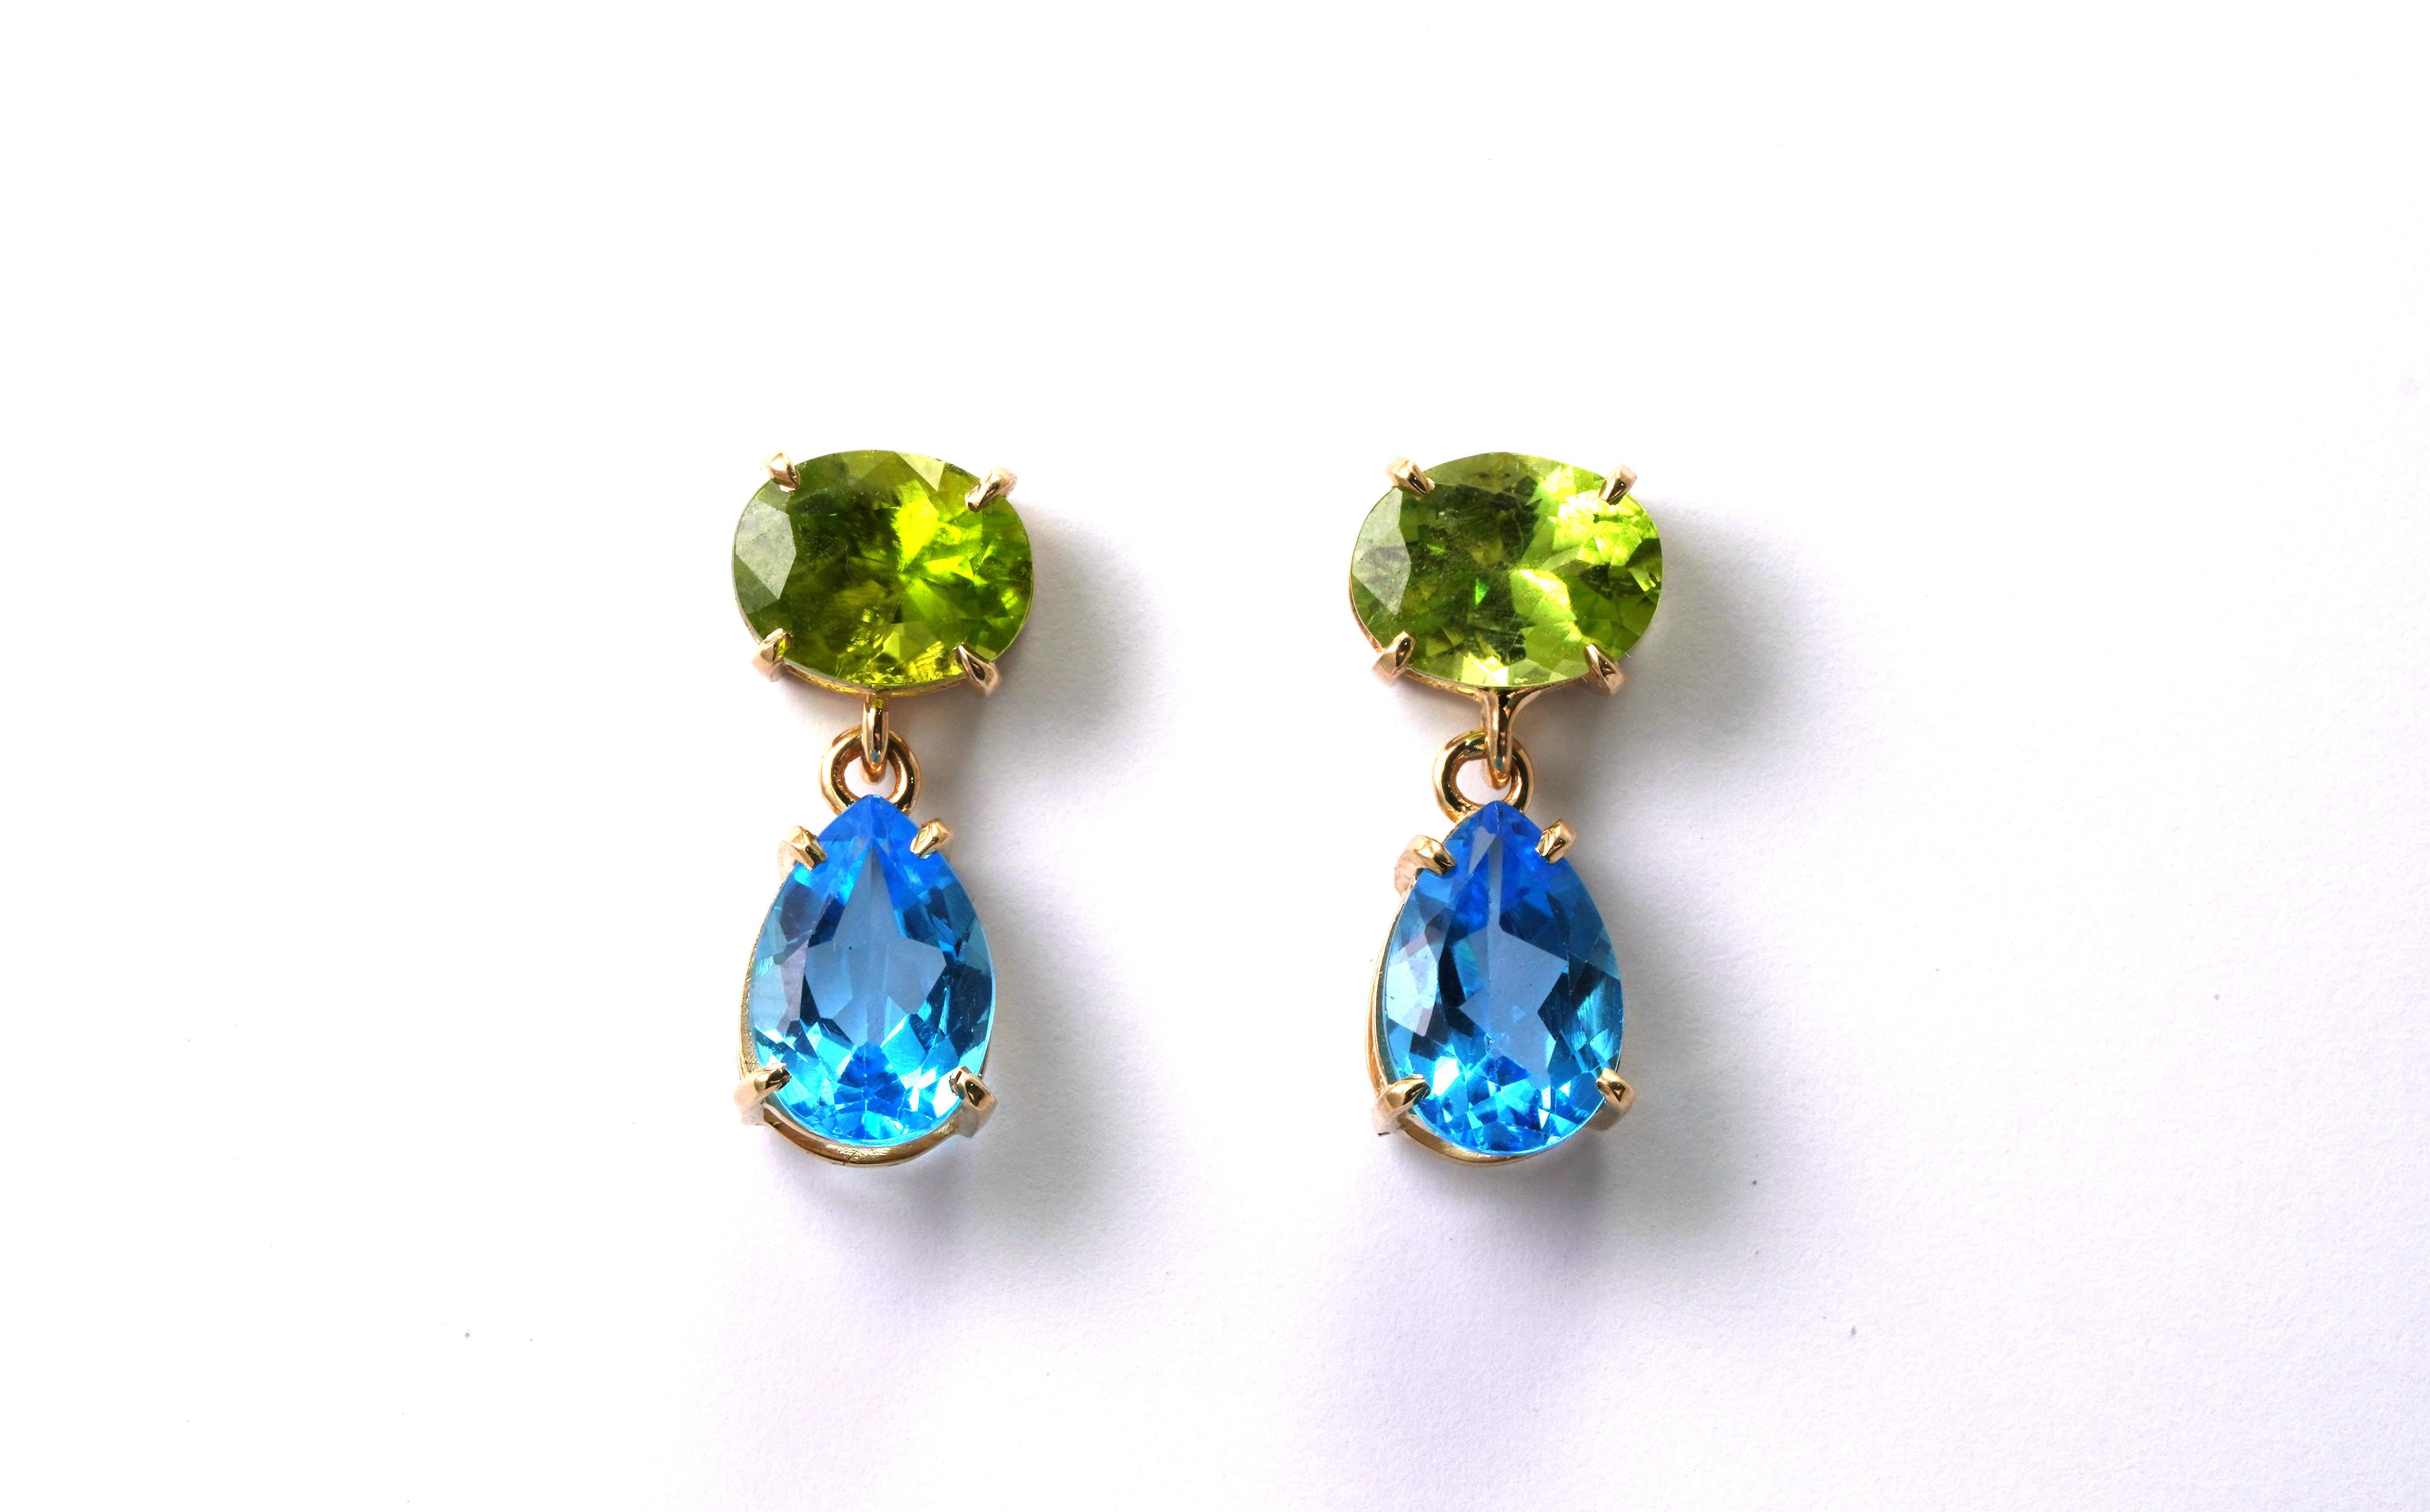 14 kt Gold pair of earrings with Peridot and Blue Topaz
Gold color: Yellow
Dimensions: 25 mm height
Total weight: 6.77 grams

Set with:
- Peridot
Cut: Oval
Color: Green
Weight: 6.25 Carat

- Blue Topaz
Cut: Pear
Color: Blue
Weight: 7.43 Carat